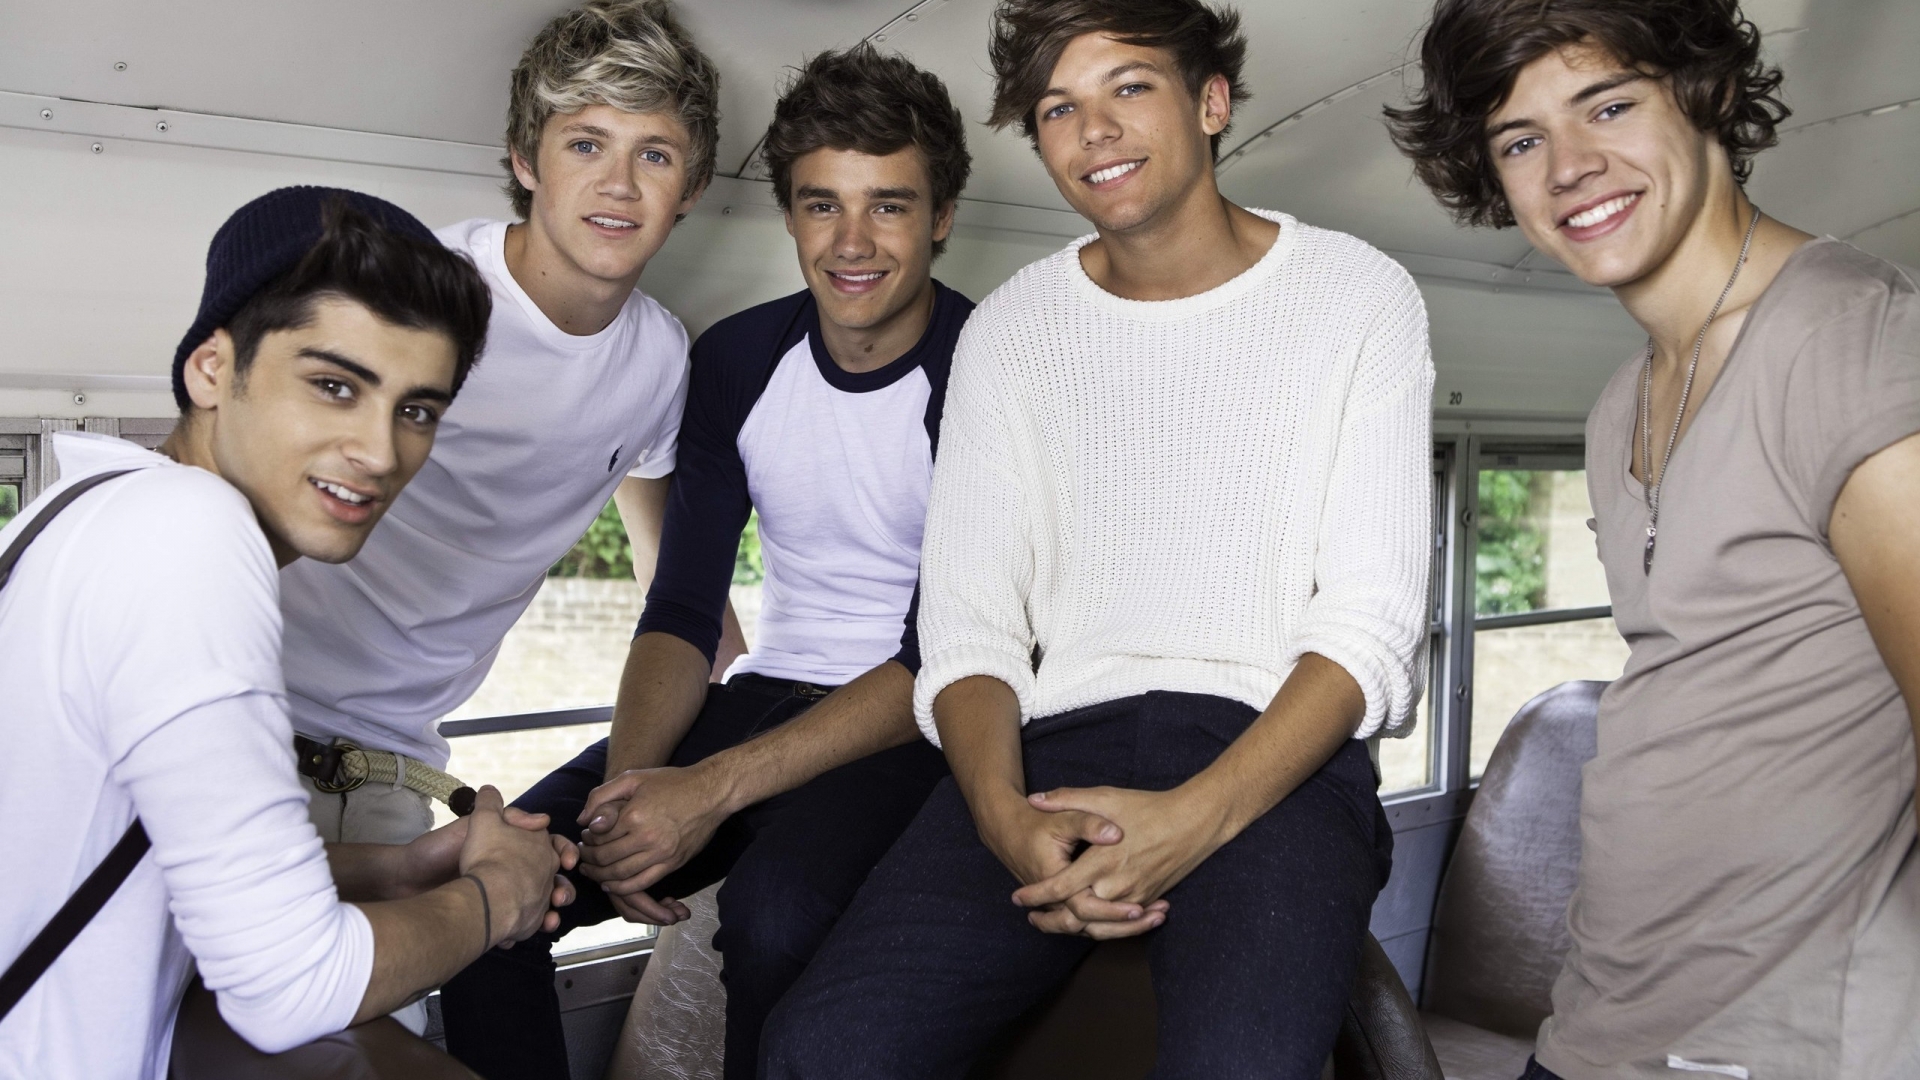 One Direction Smiling for 1920 x 1080 HDTV 1080p resolution